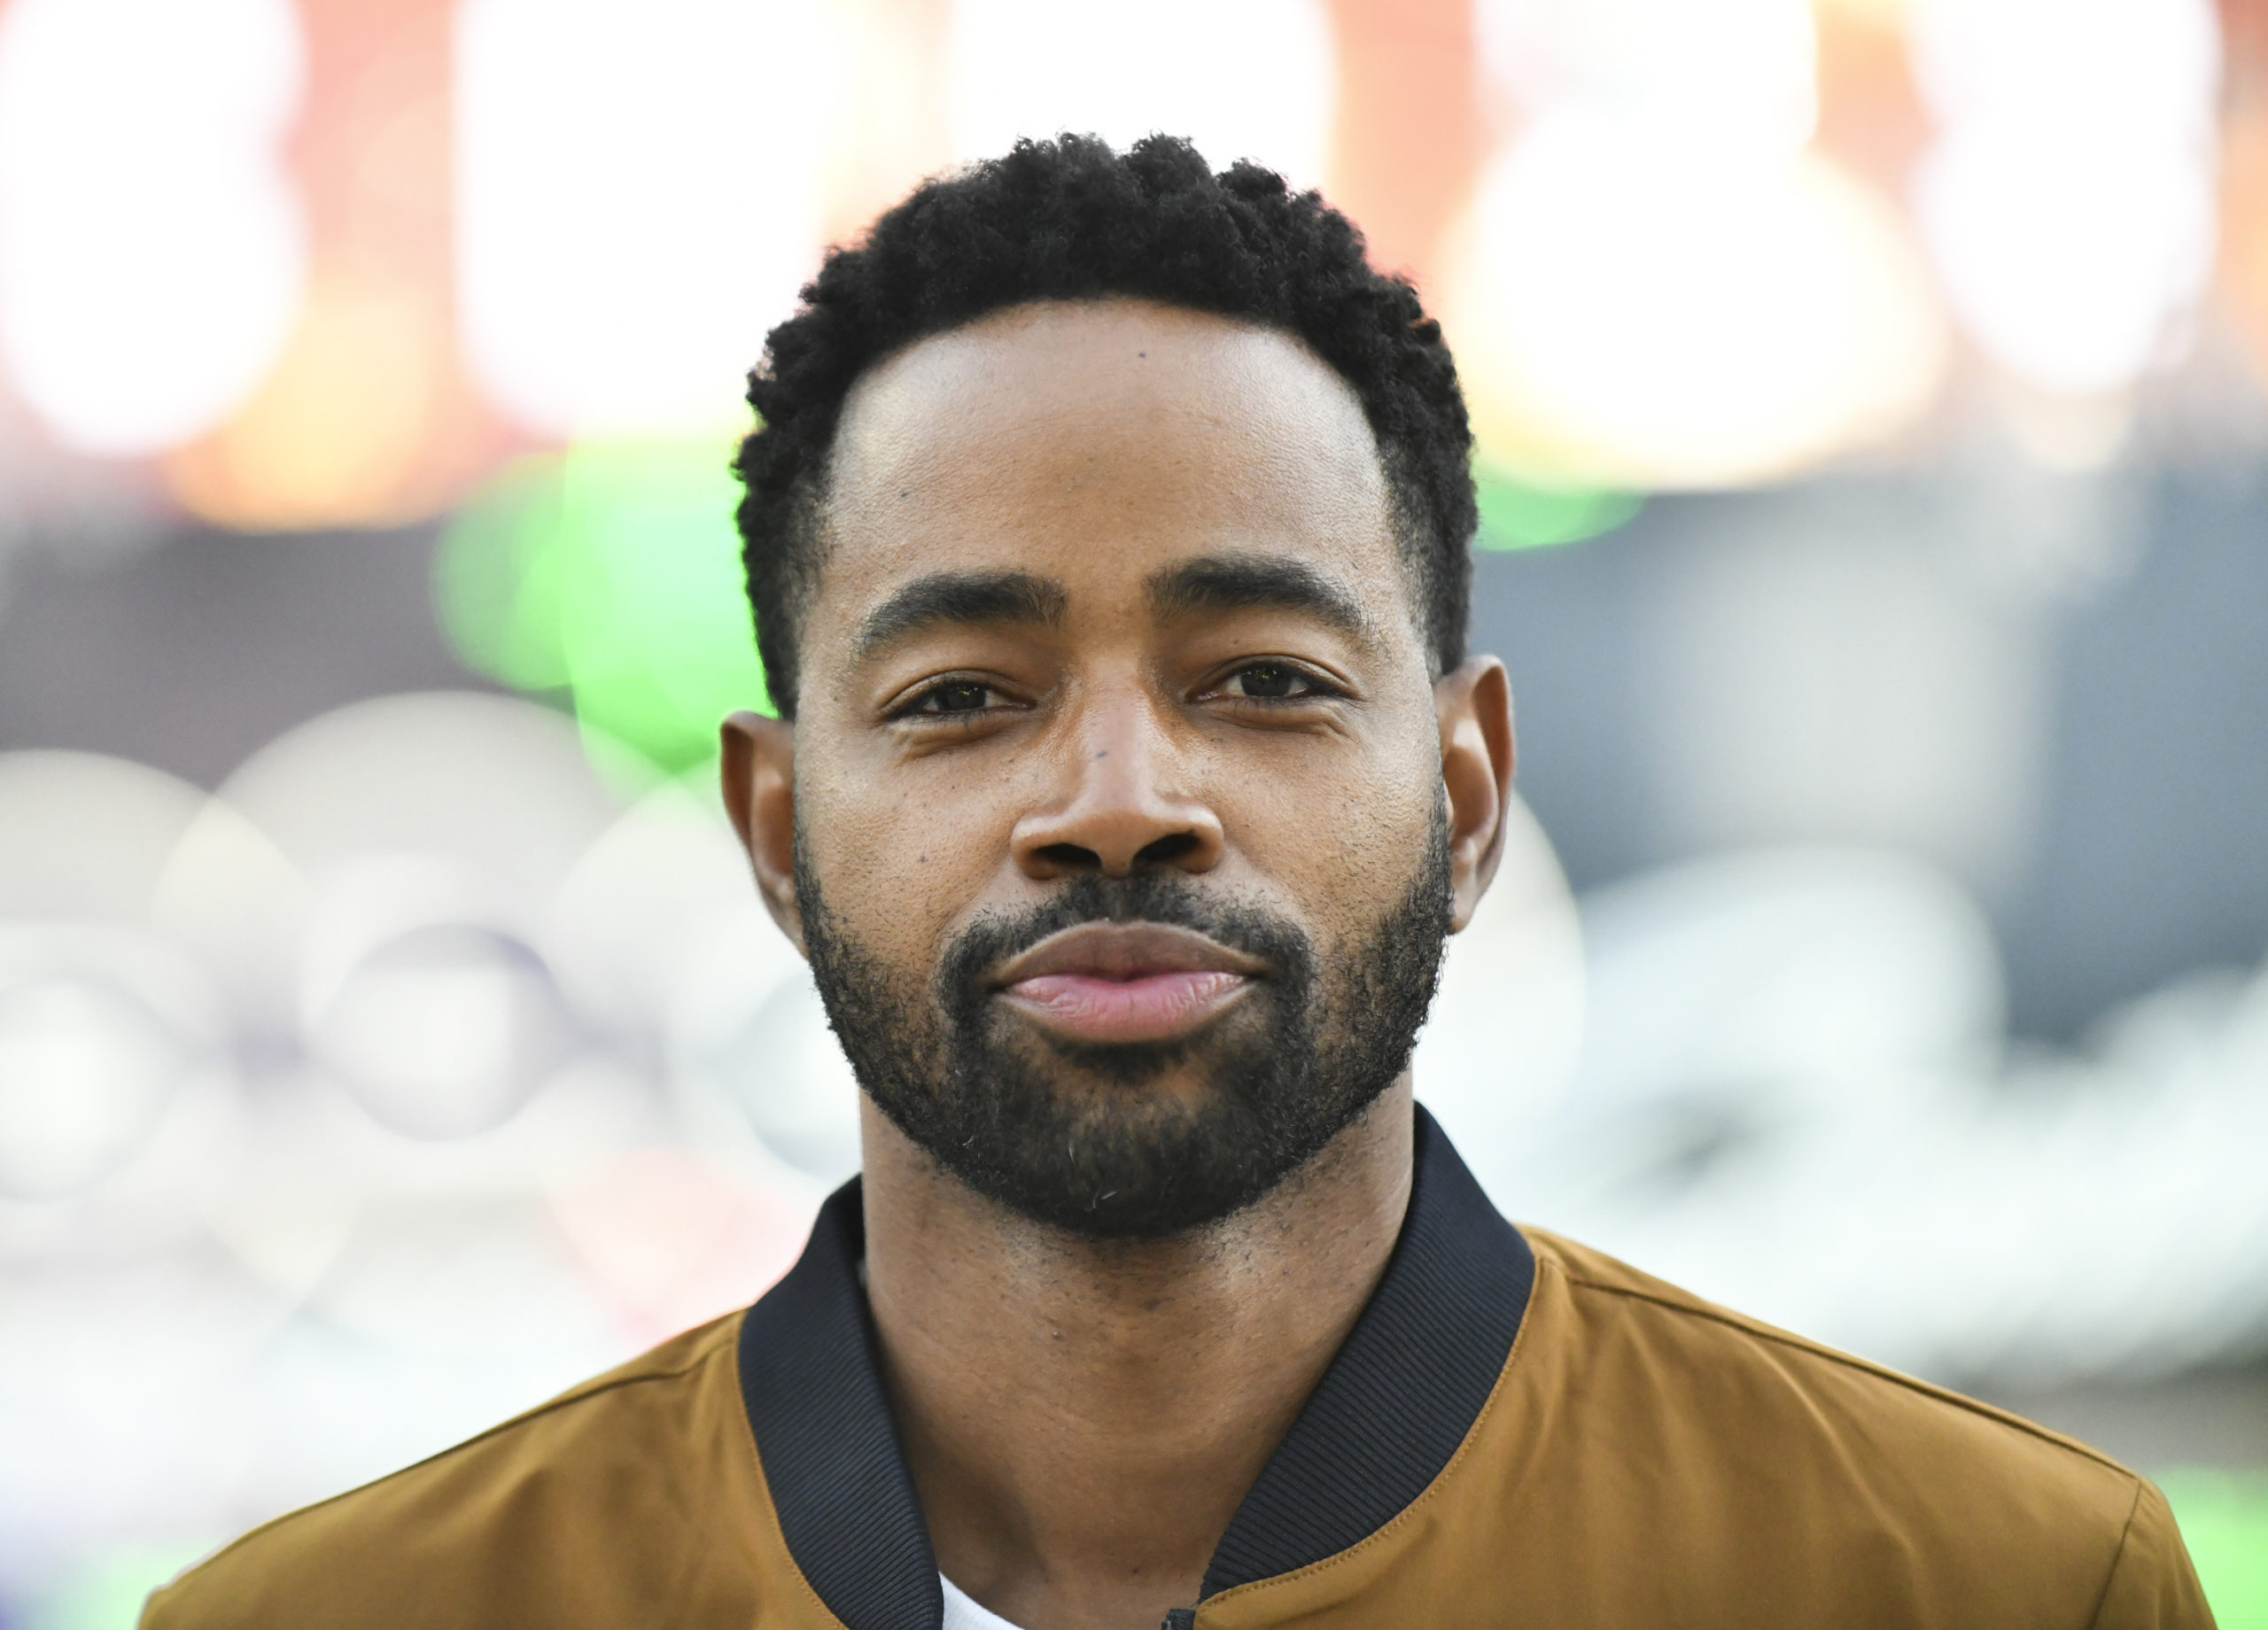 ‘I Got Slapped In JFK’ ‘Insecure’ Actor Jay Ellis Claims Someone